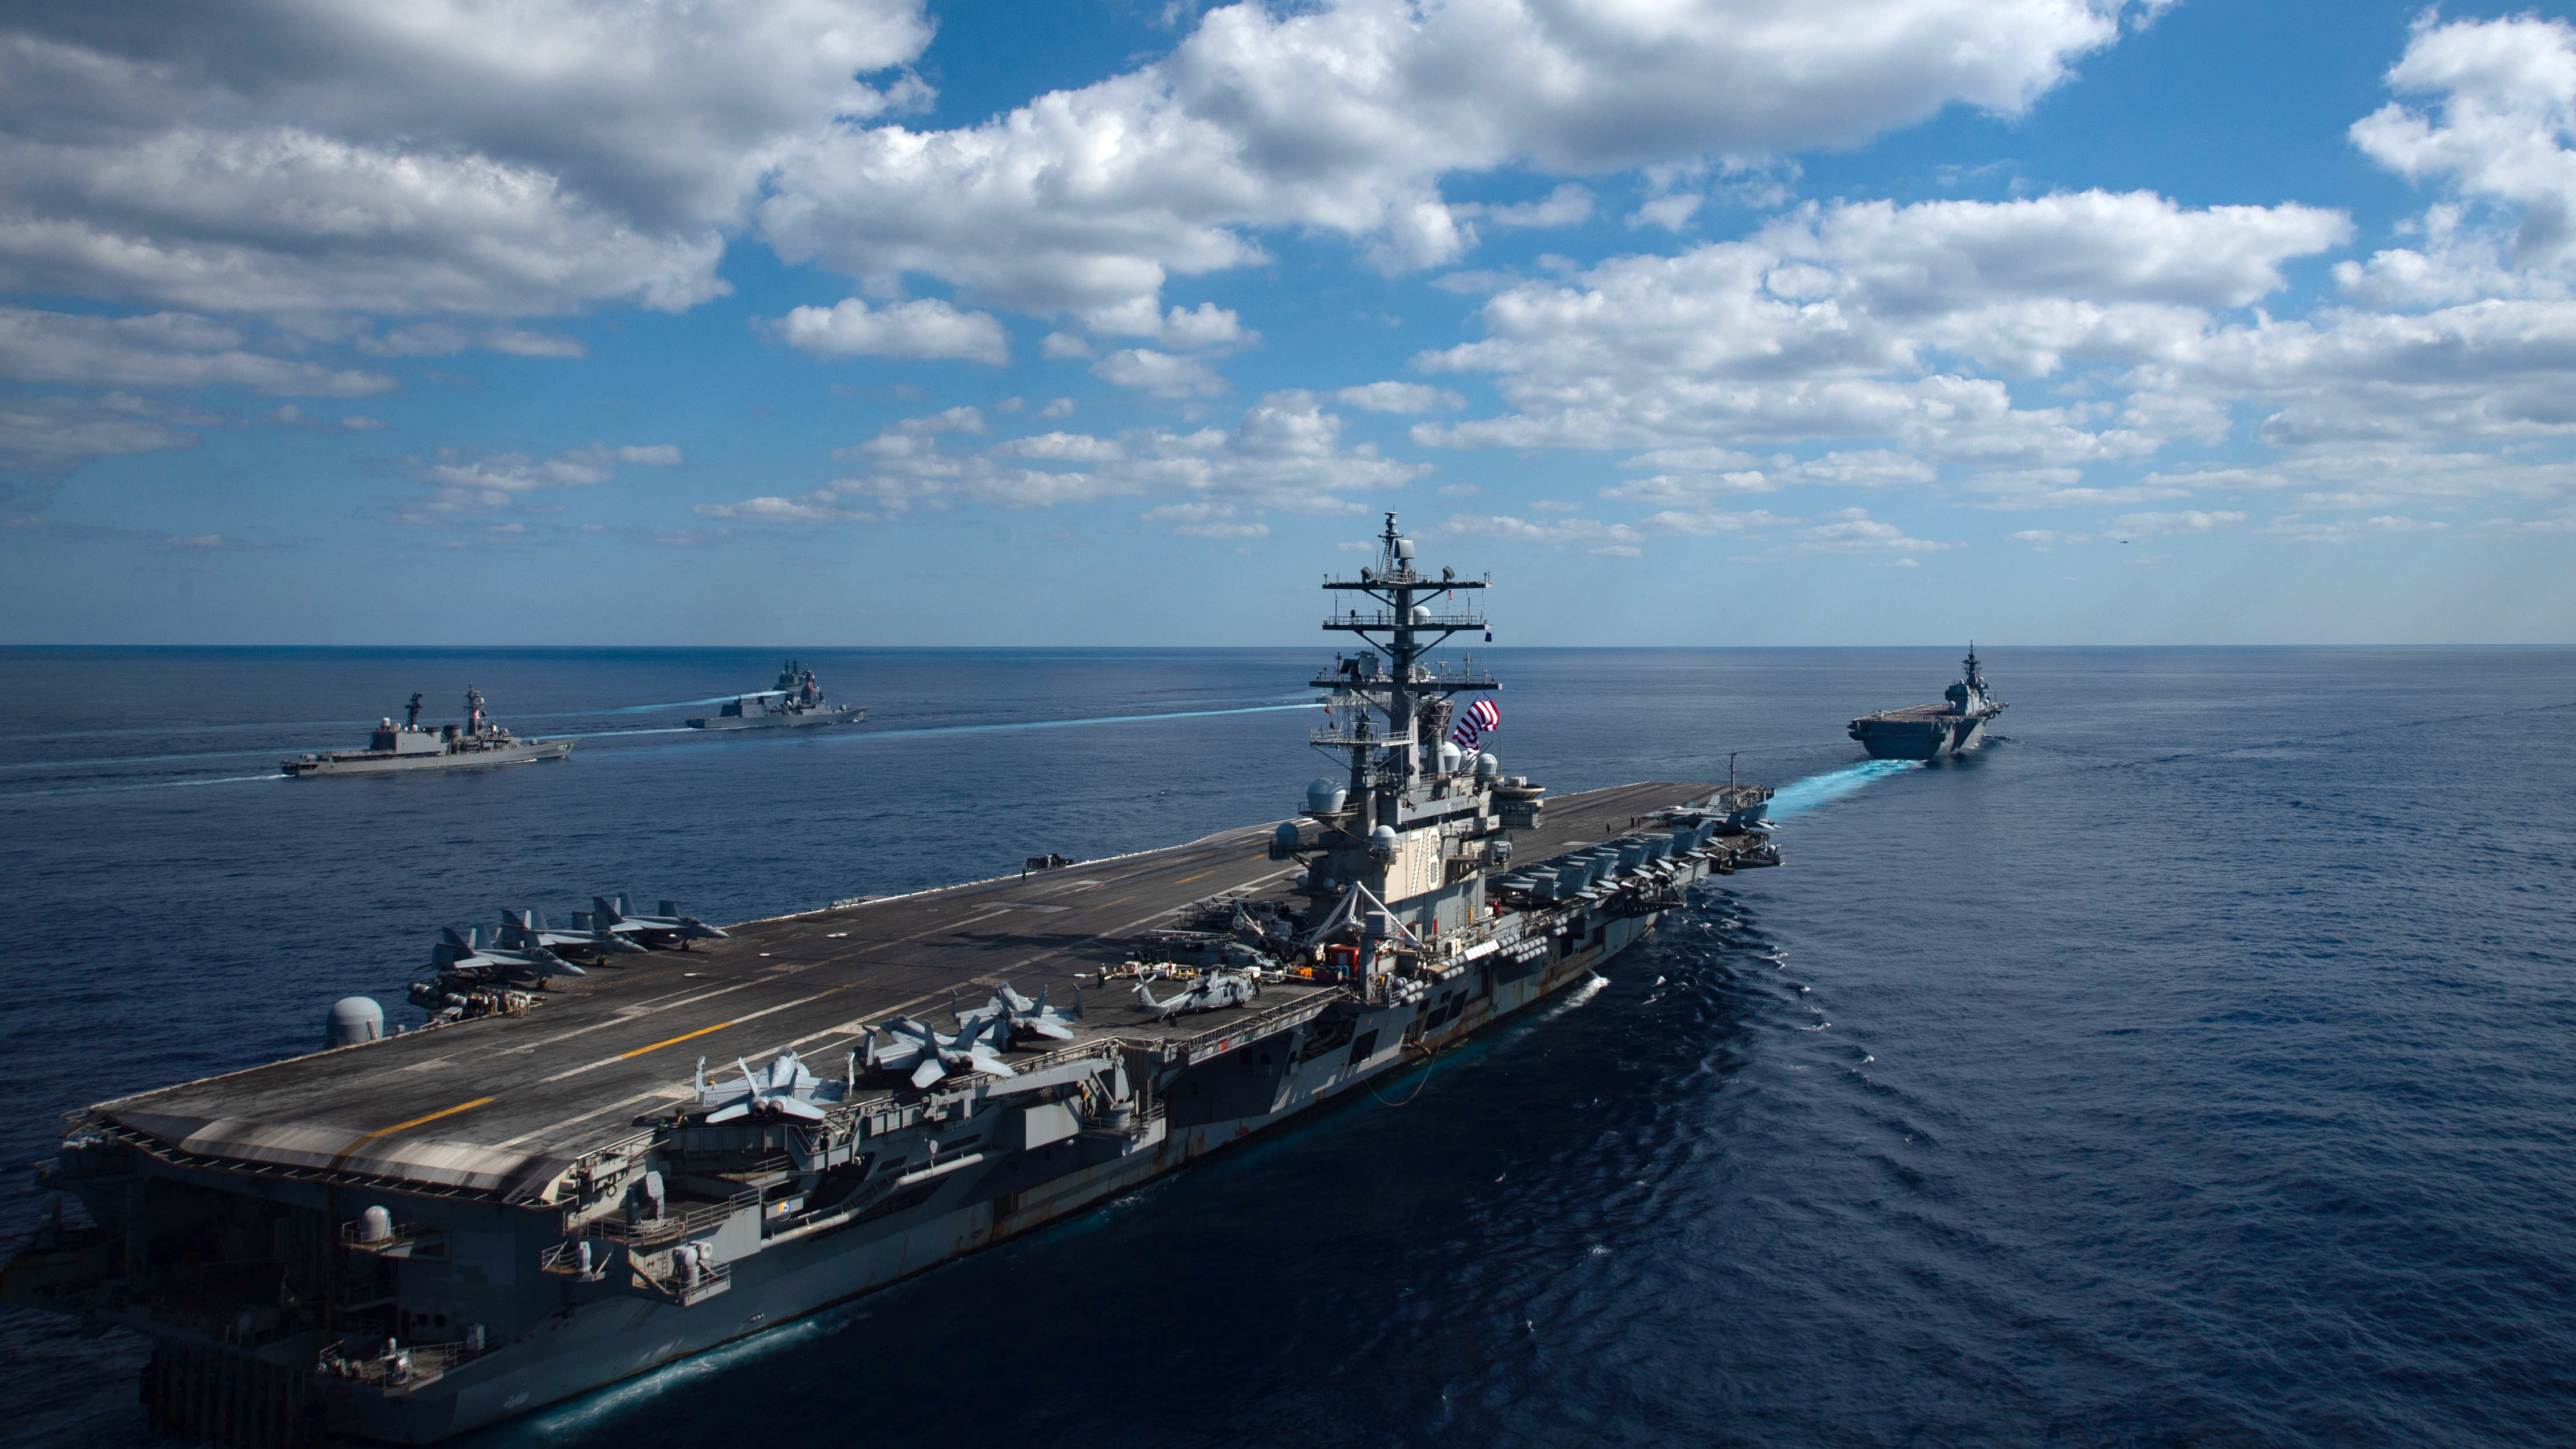 U.S. Navy ships assigned to Ronald Reagan Carrier Strike Group joined ships of Japan Maritime Self-Defense Force (JMSDF) Escort Flotilla 1, Escort Flotilla 4, and the Royal Canadian Navy, in formation during Keen Sword 21. (U.S. Navy photo by Mass Communication Specialist Seaman Askia Collins)